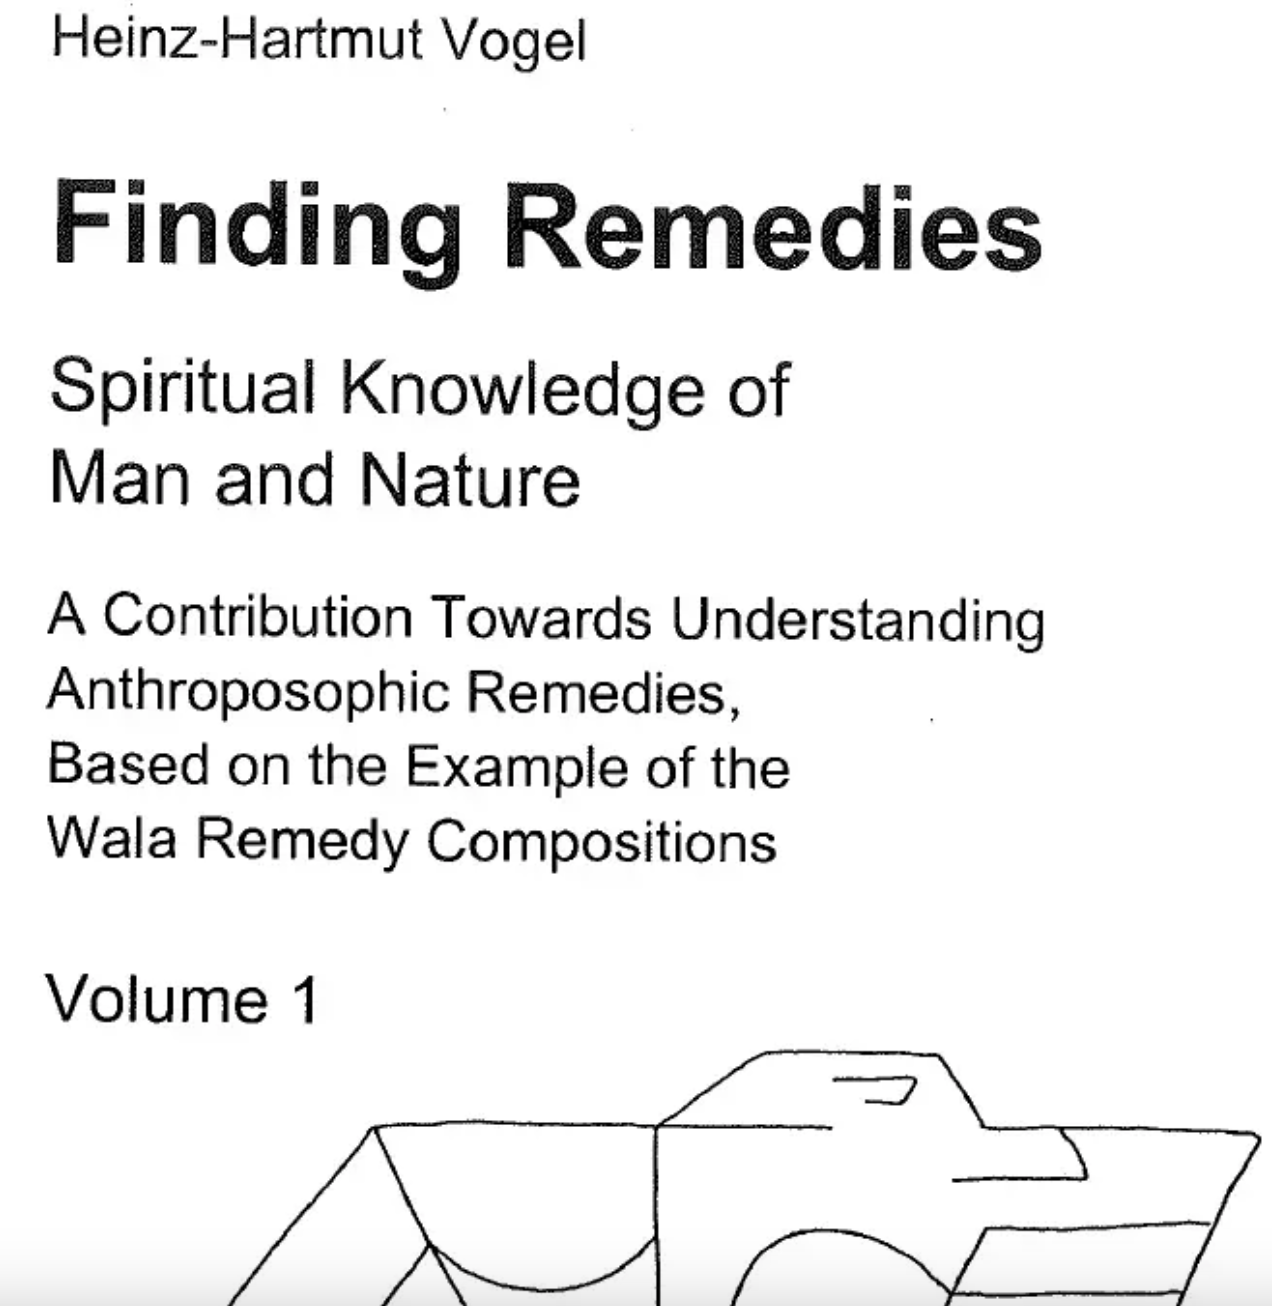 Finding remedies: Spiritual knowledge of man and nature, anthroposophic remedies (Vogel)